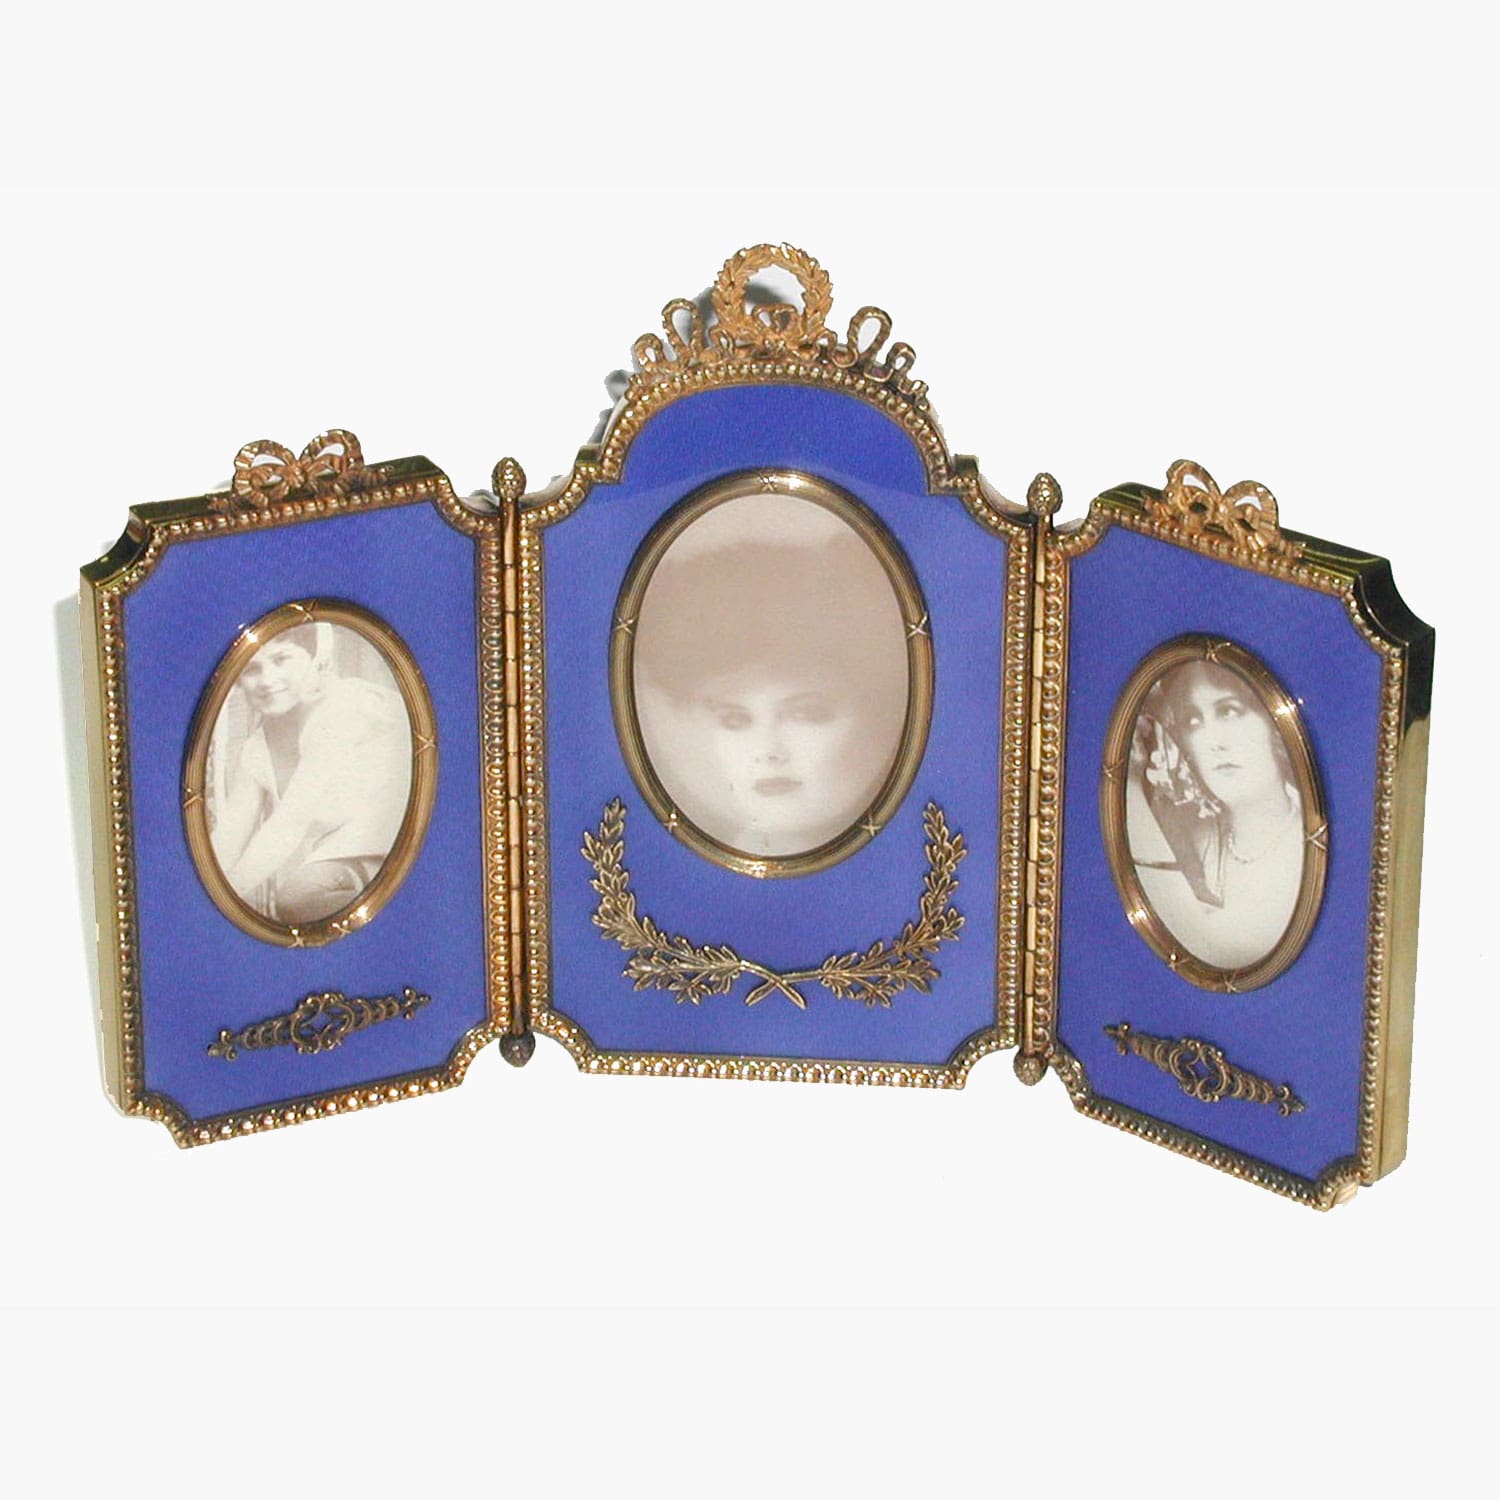 Rectangular photo frame handmade Salimbeni in 925/1000 sterling silver gold plated with translucent fired enamels grey on guillochè and internal borders in Louis XVI French Empire style blue enamelled. External size cm. 12 x 15, internal 7 x 9. Weight gr. 315.